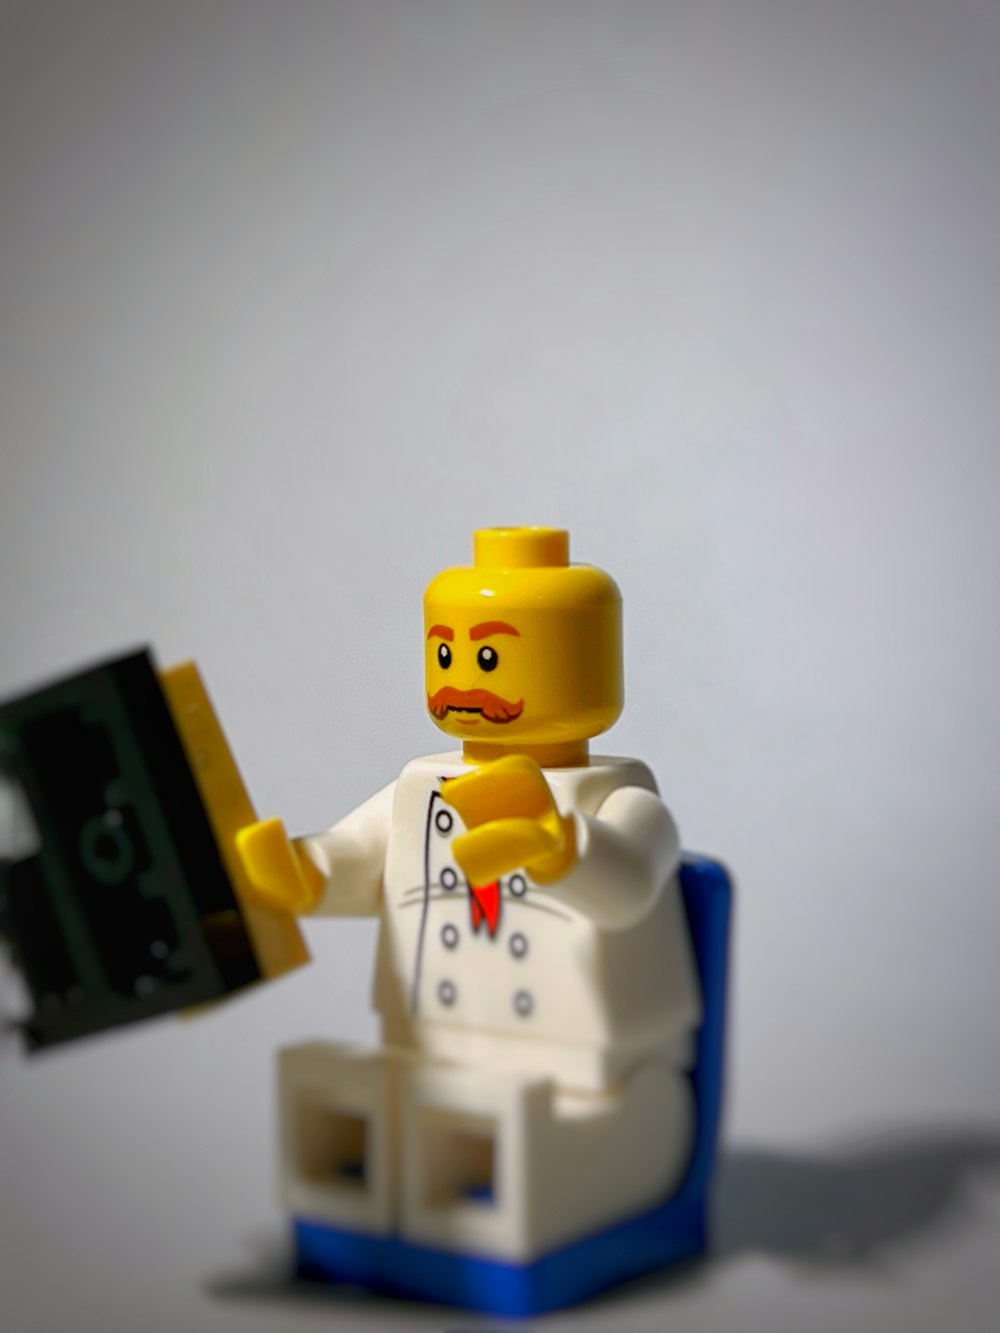 a lego man holding a black object in his hand